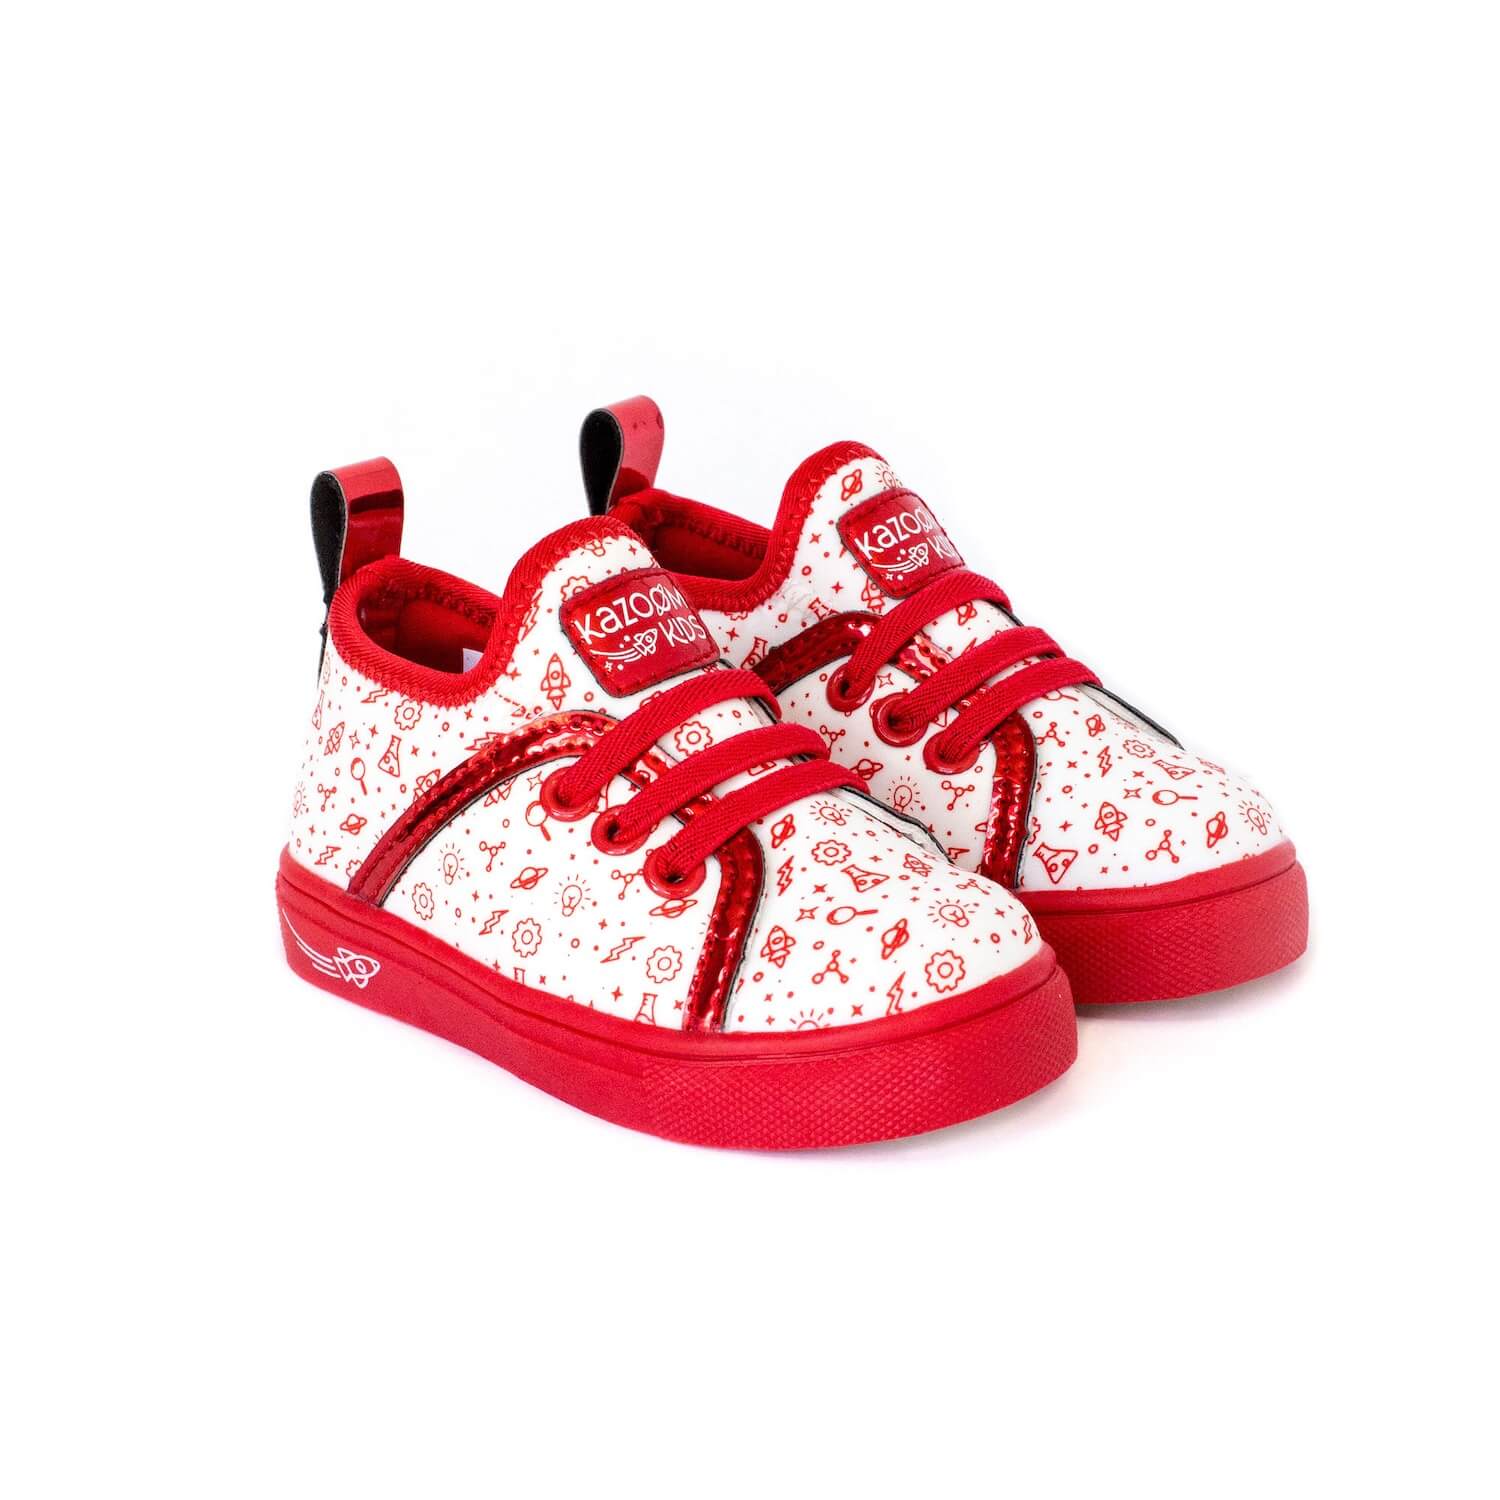 Pair of red Science slip on Shoes